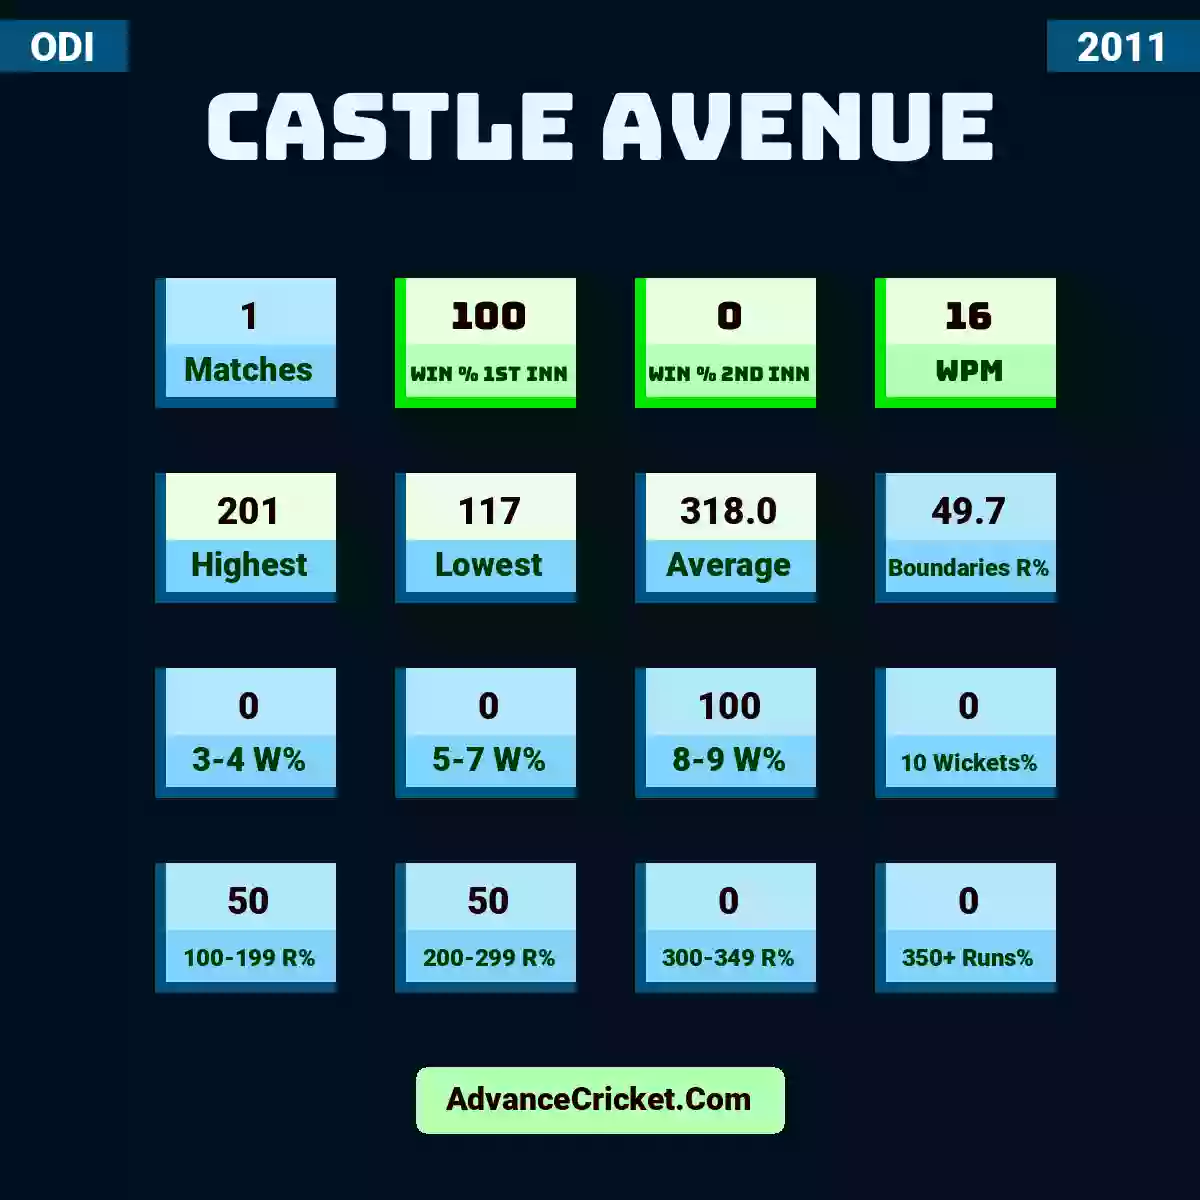 Image showing Castle Avenue with Matches: 1, Win % 1st Inn: 100, Win % 2nd Inn: 0, WPM: 16, Highest: 201, Lowest: 117, Average: 318.0, Boundaries R%: 49.7, 3-4 W%: 0, 5-7 W%: 0, 8-9 W%: 100, 10 Wickets%: 0, 100-199 R%: 50, 200-299 R%: 50, 300-349 R%: 0, 350+ Runs%: 0.